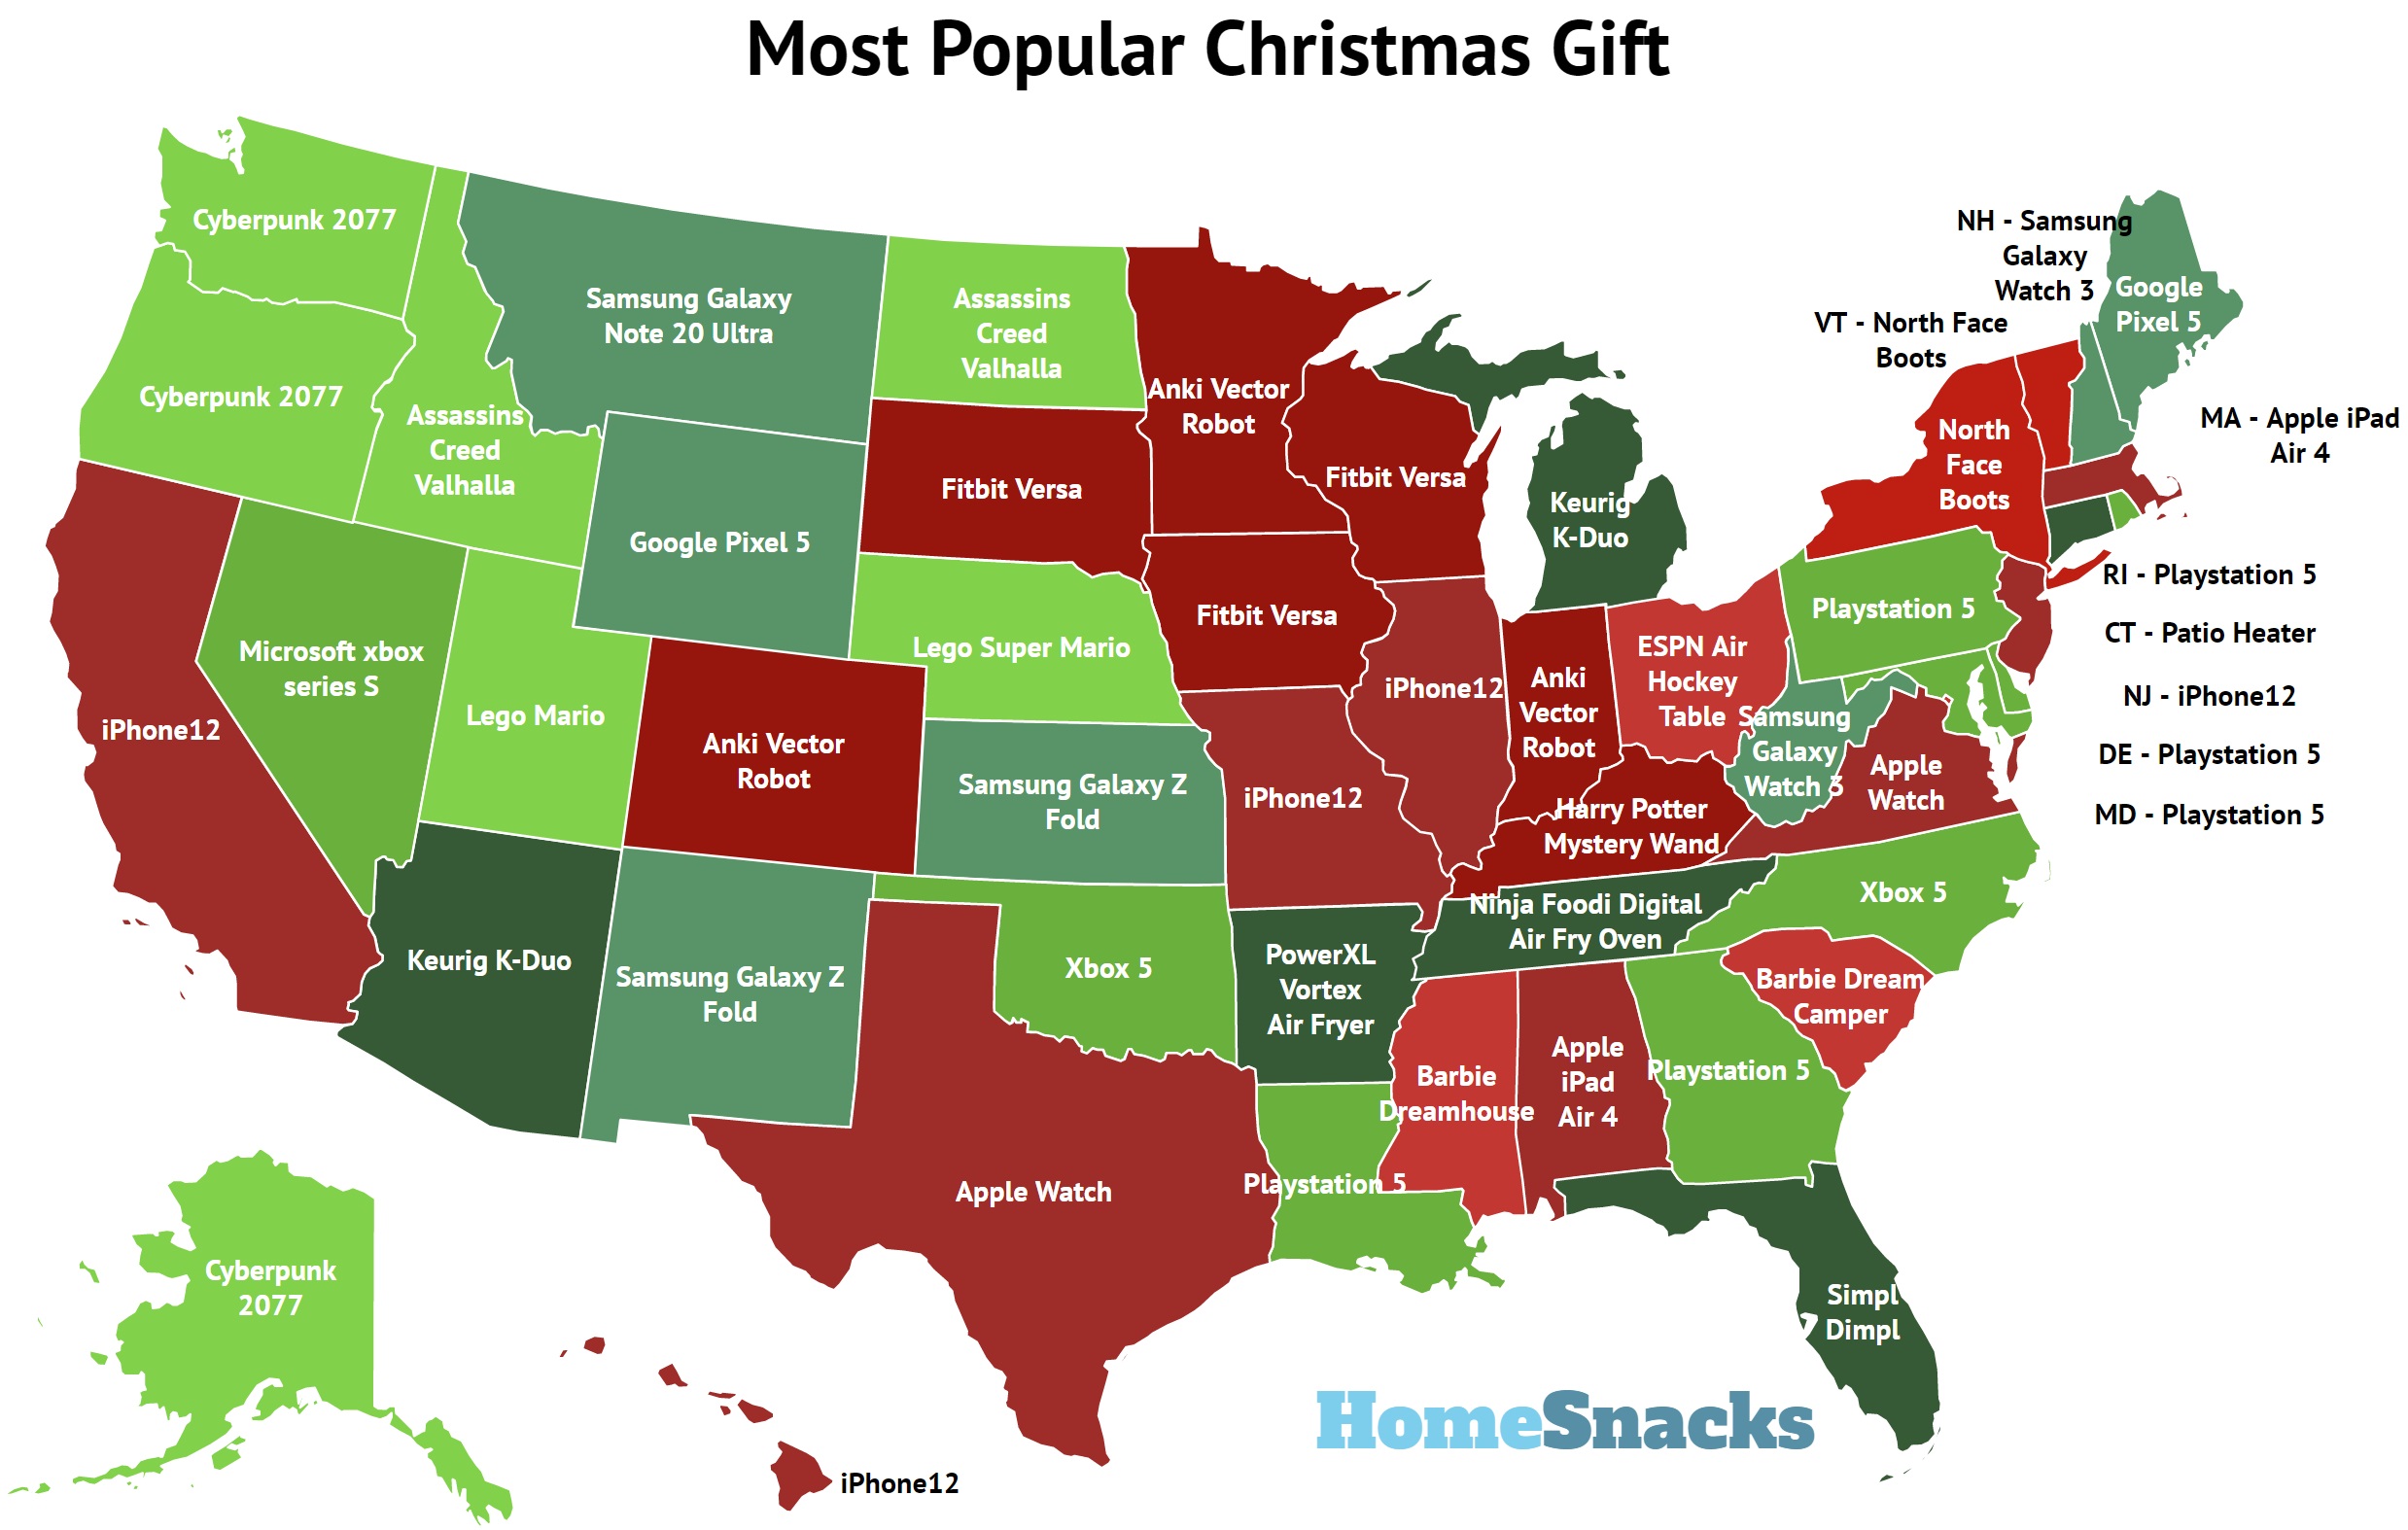 Most Popular Christmas Gift In Each State